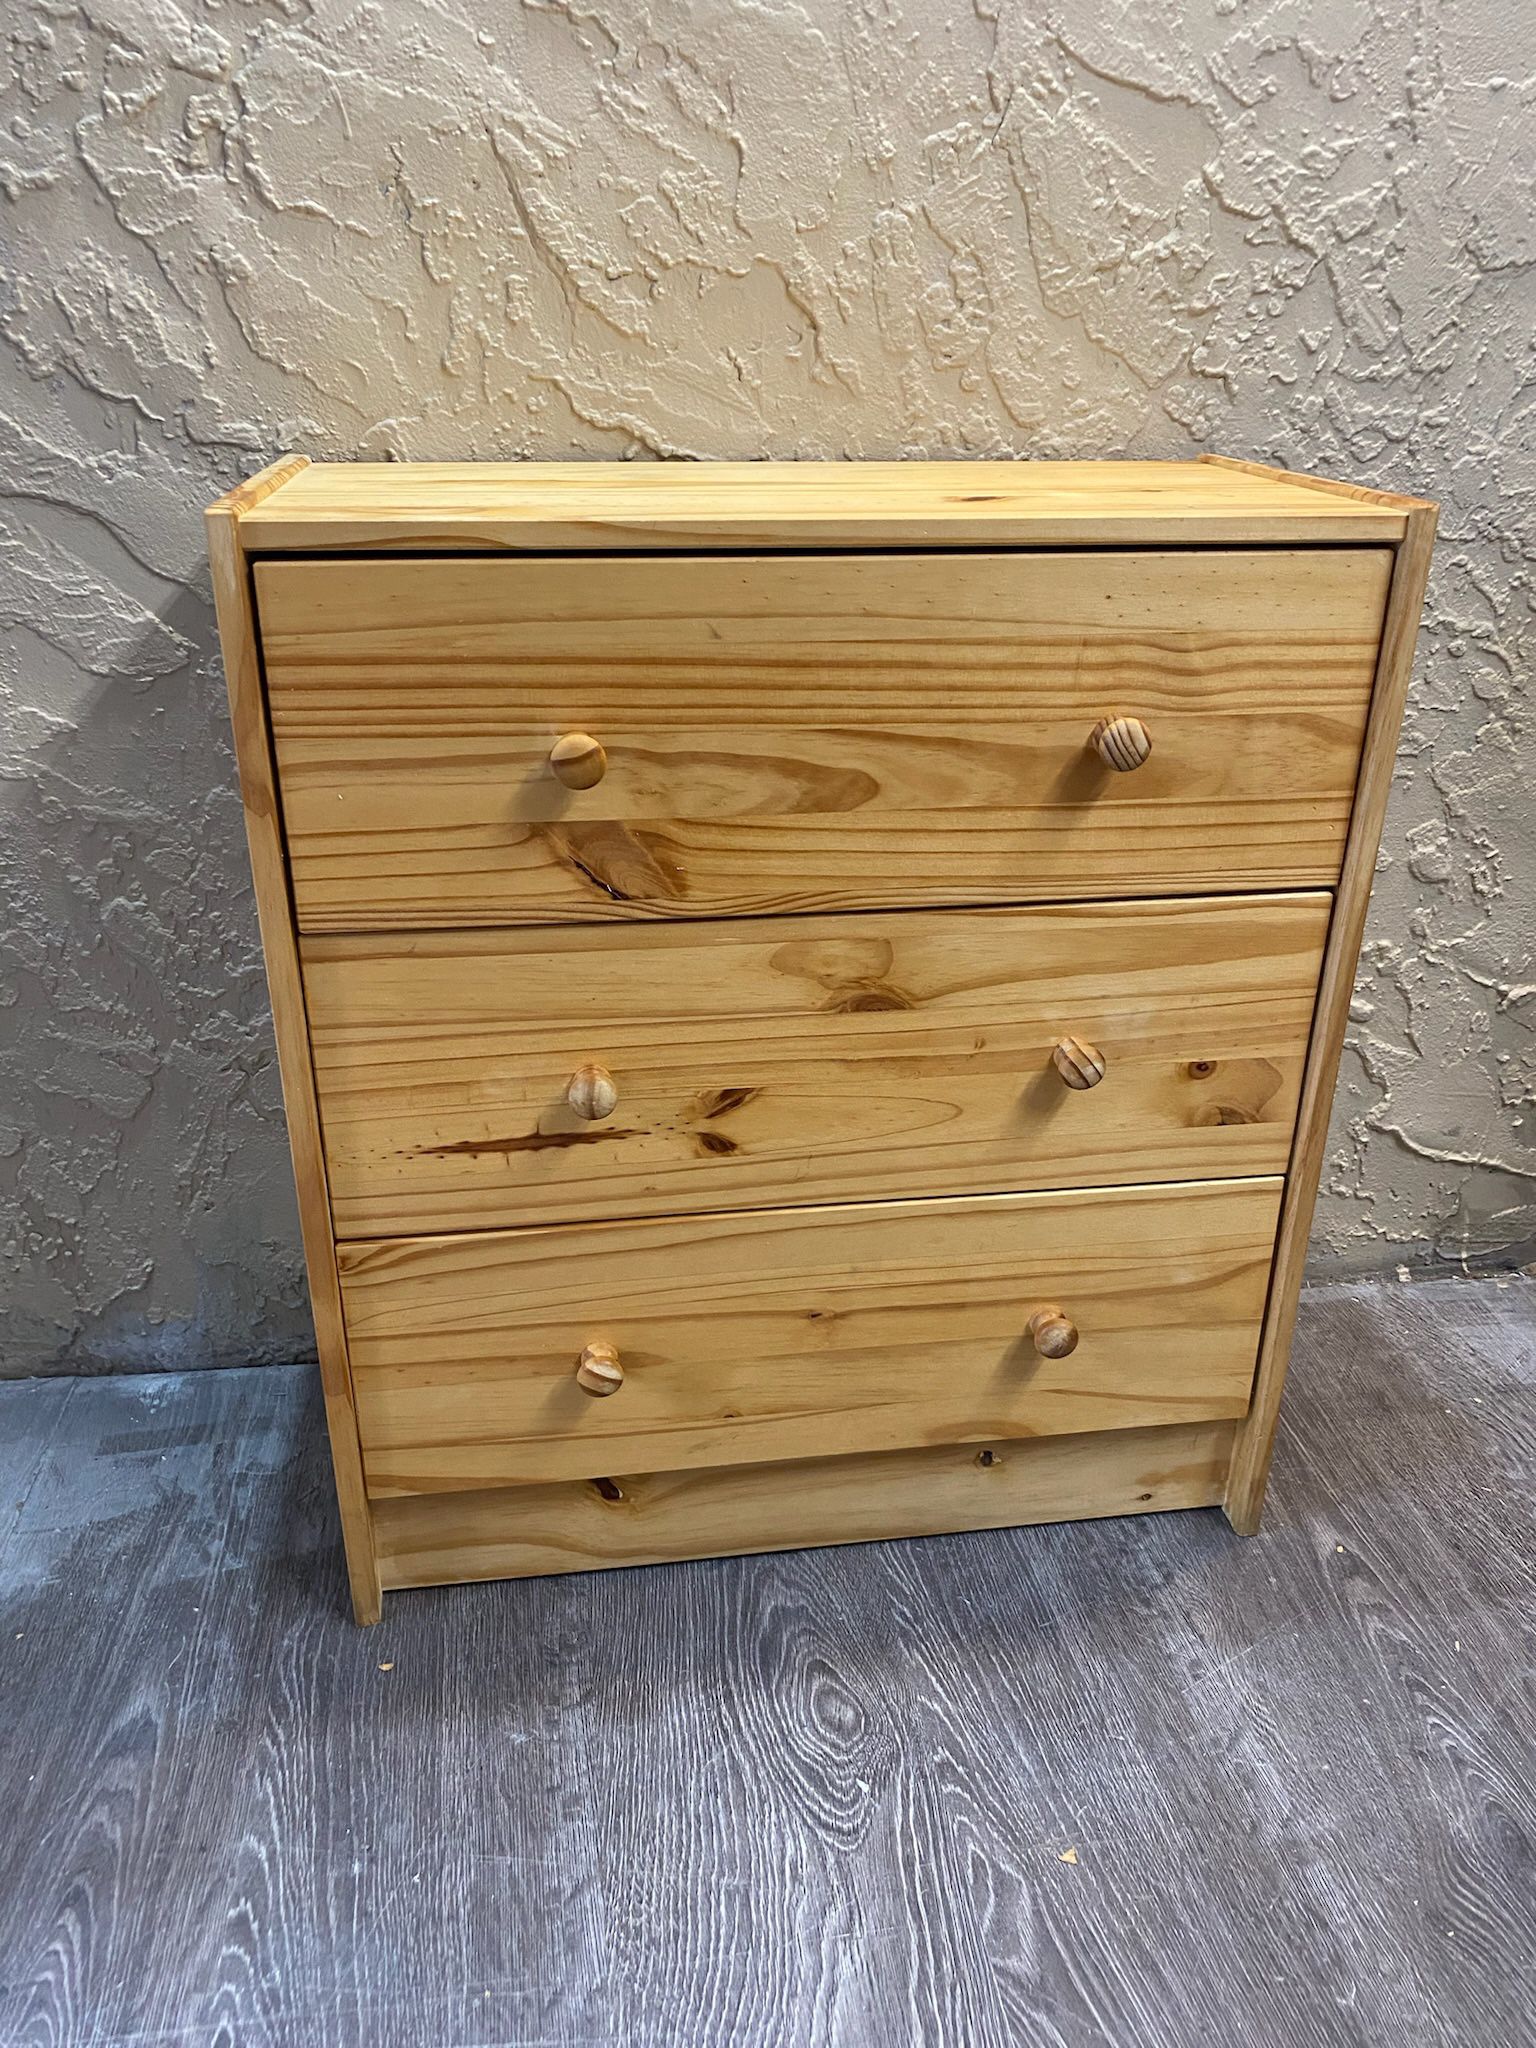 Real Pine Wood Three Drawer Wood Dresser - Local Delivery for a Fee - See My Items 